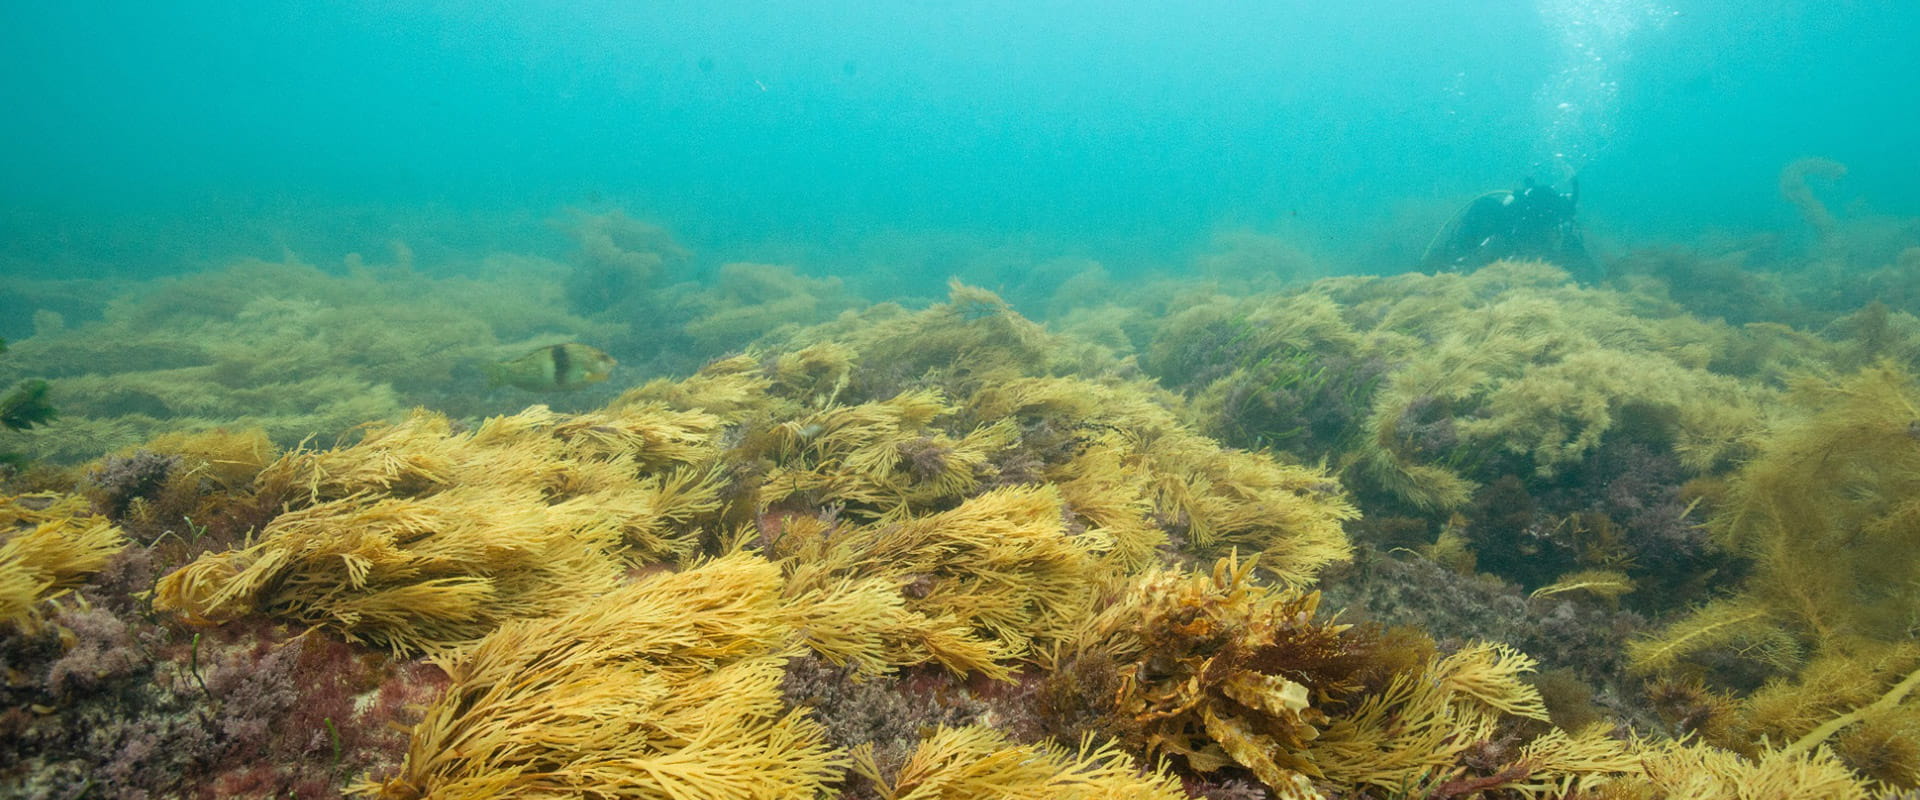 A scuba diver explores a rich underwater garden bursting with golden kelp and crayweed.